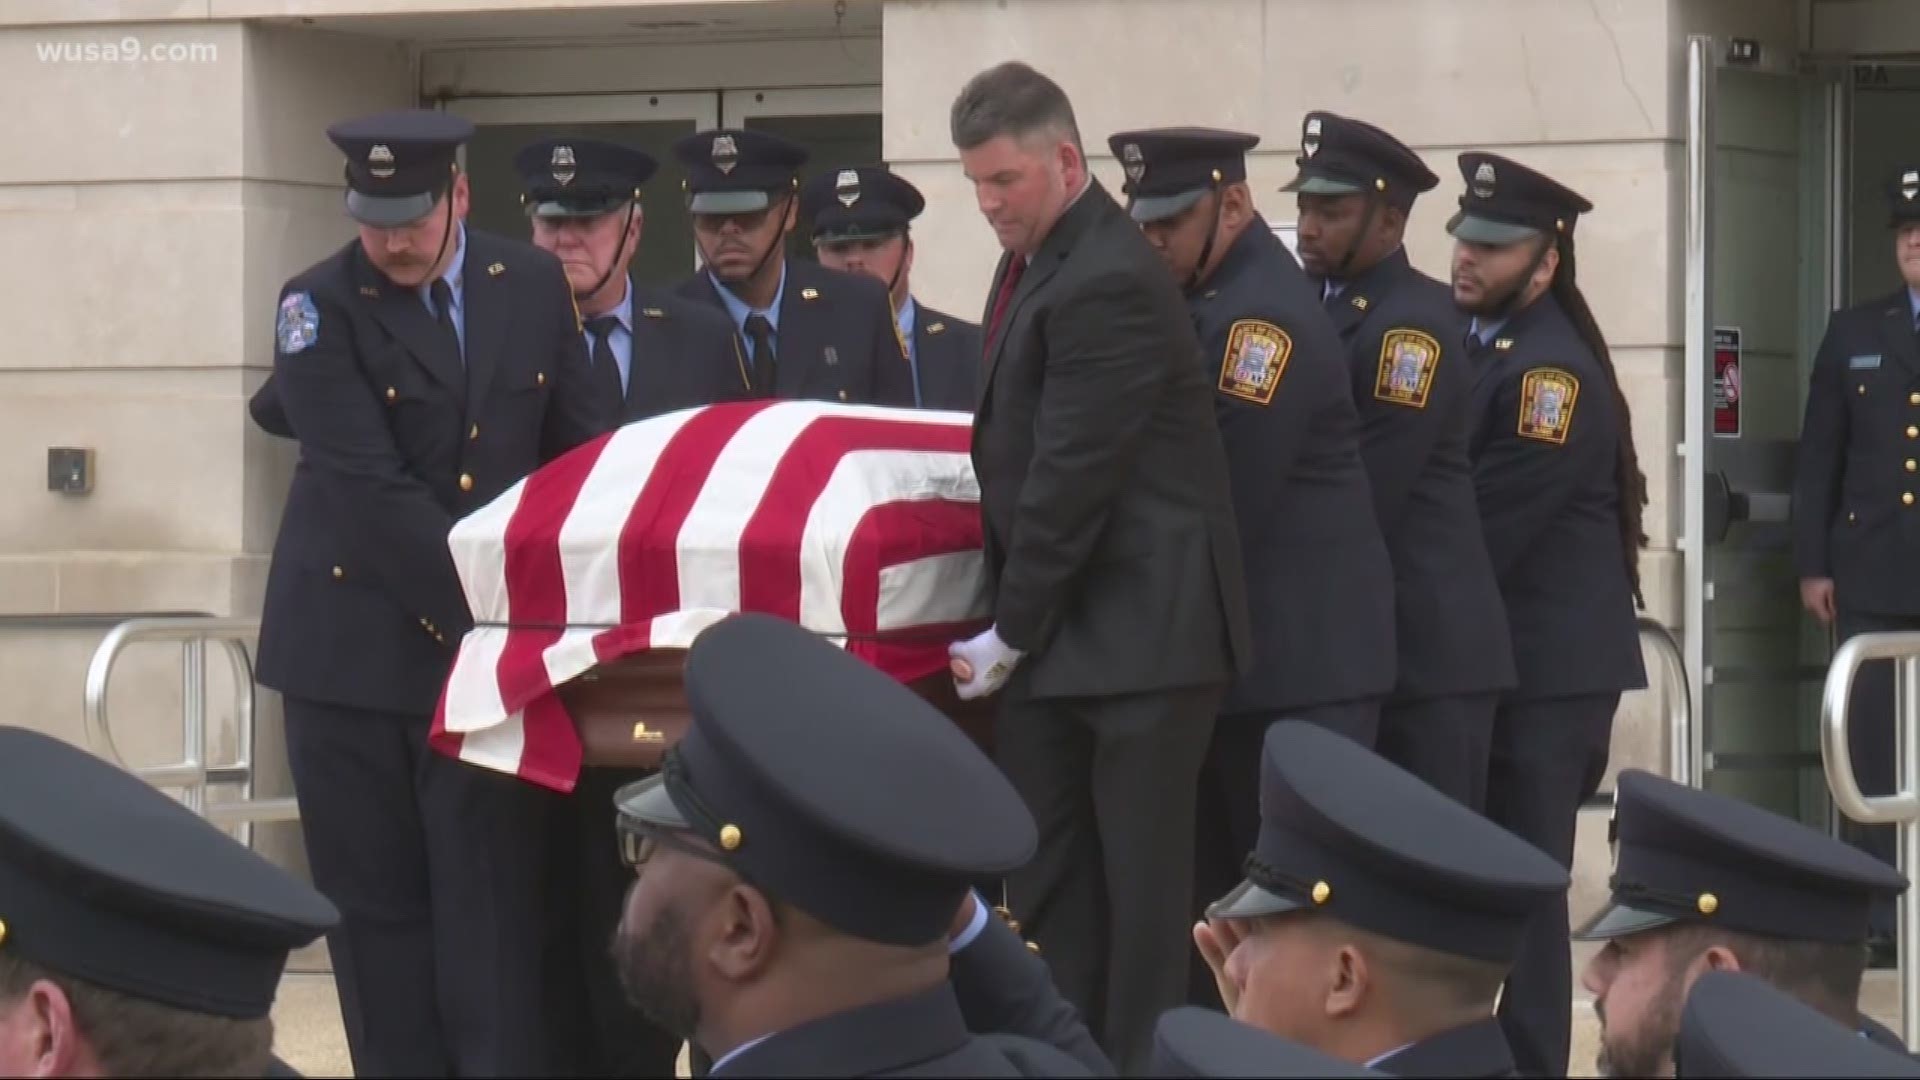 The 48-year-old firefighter passed away on Oct. 27, after serving the city for 17 years.